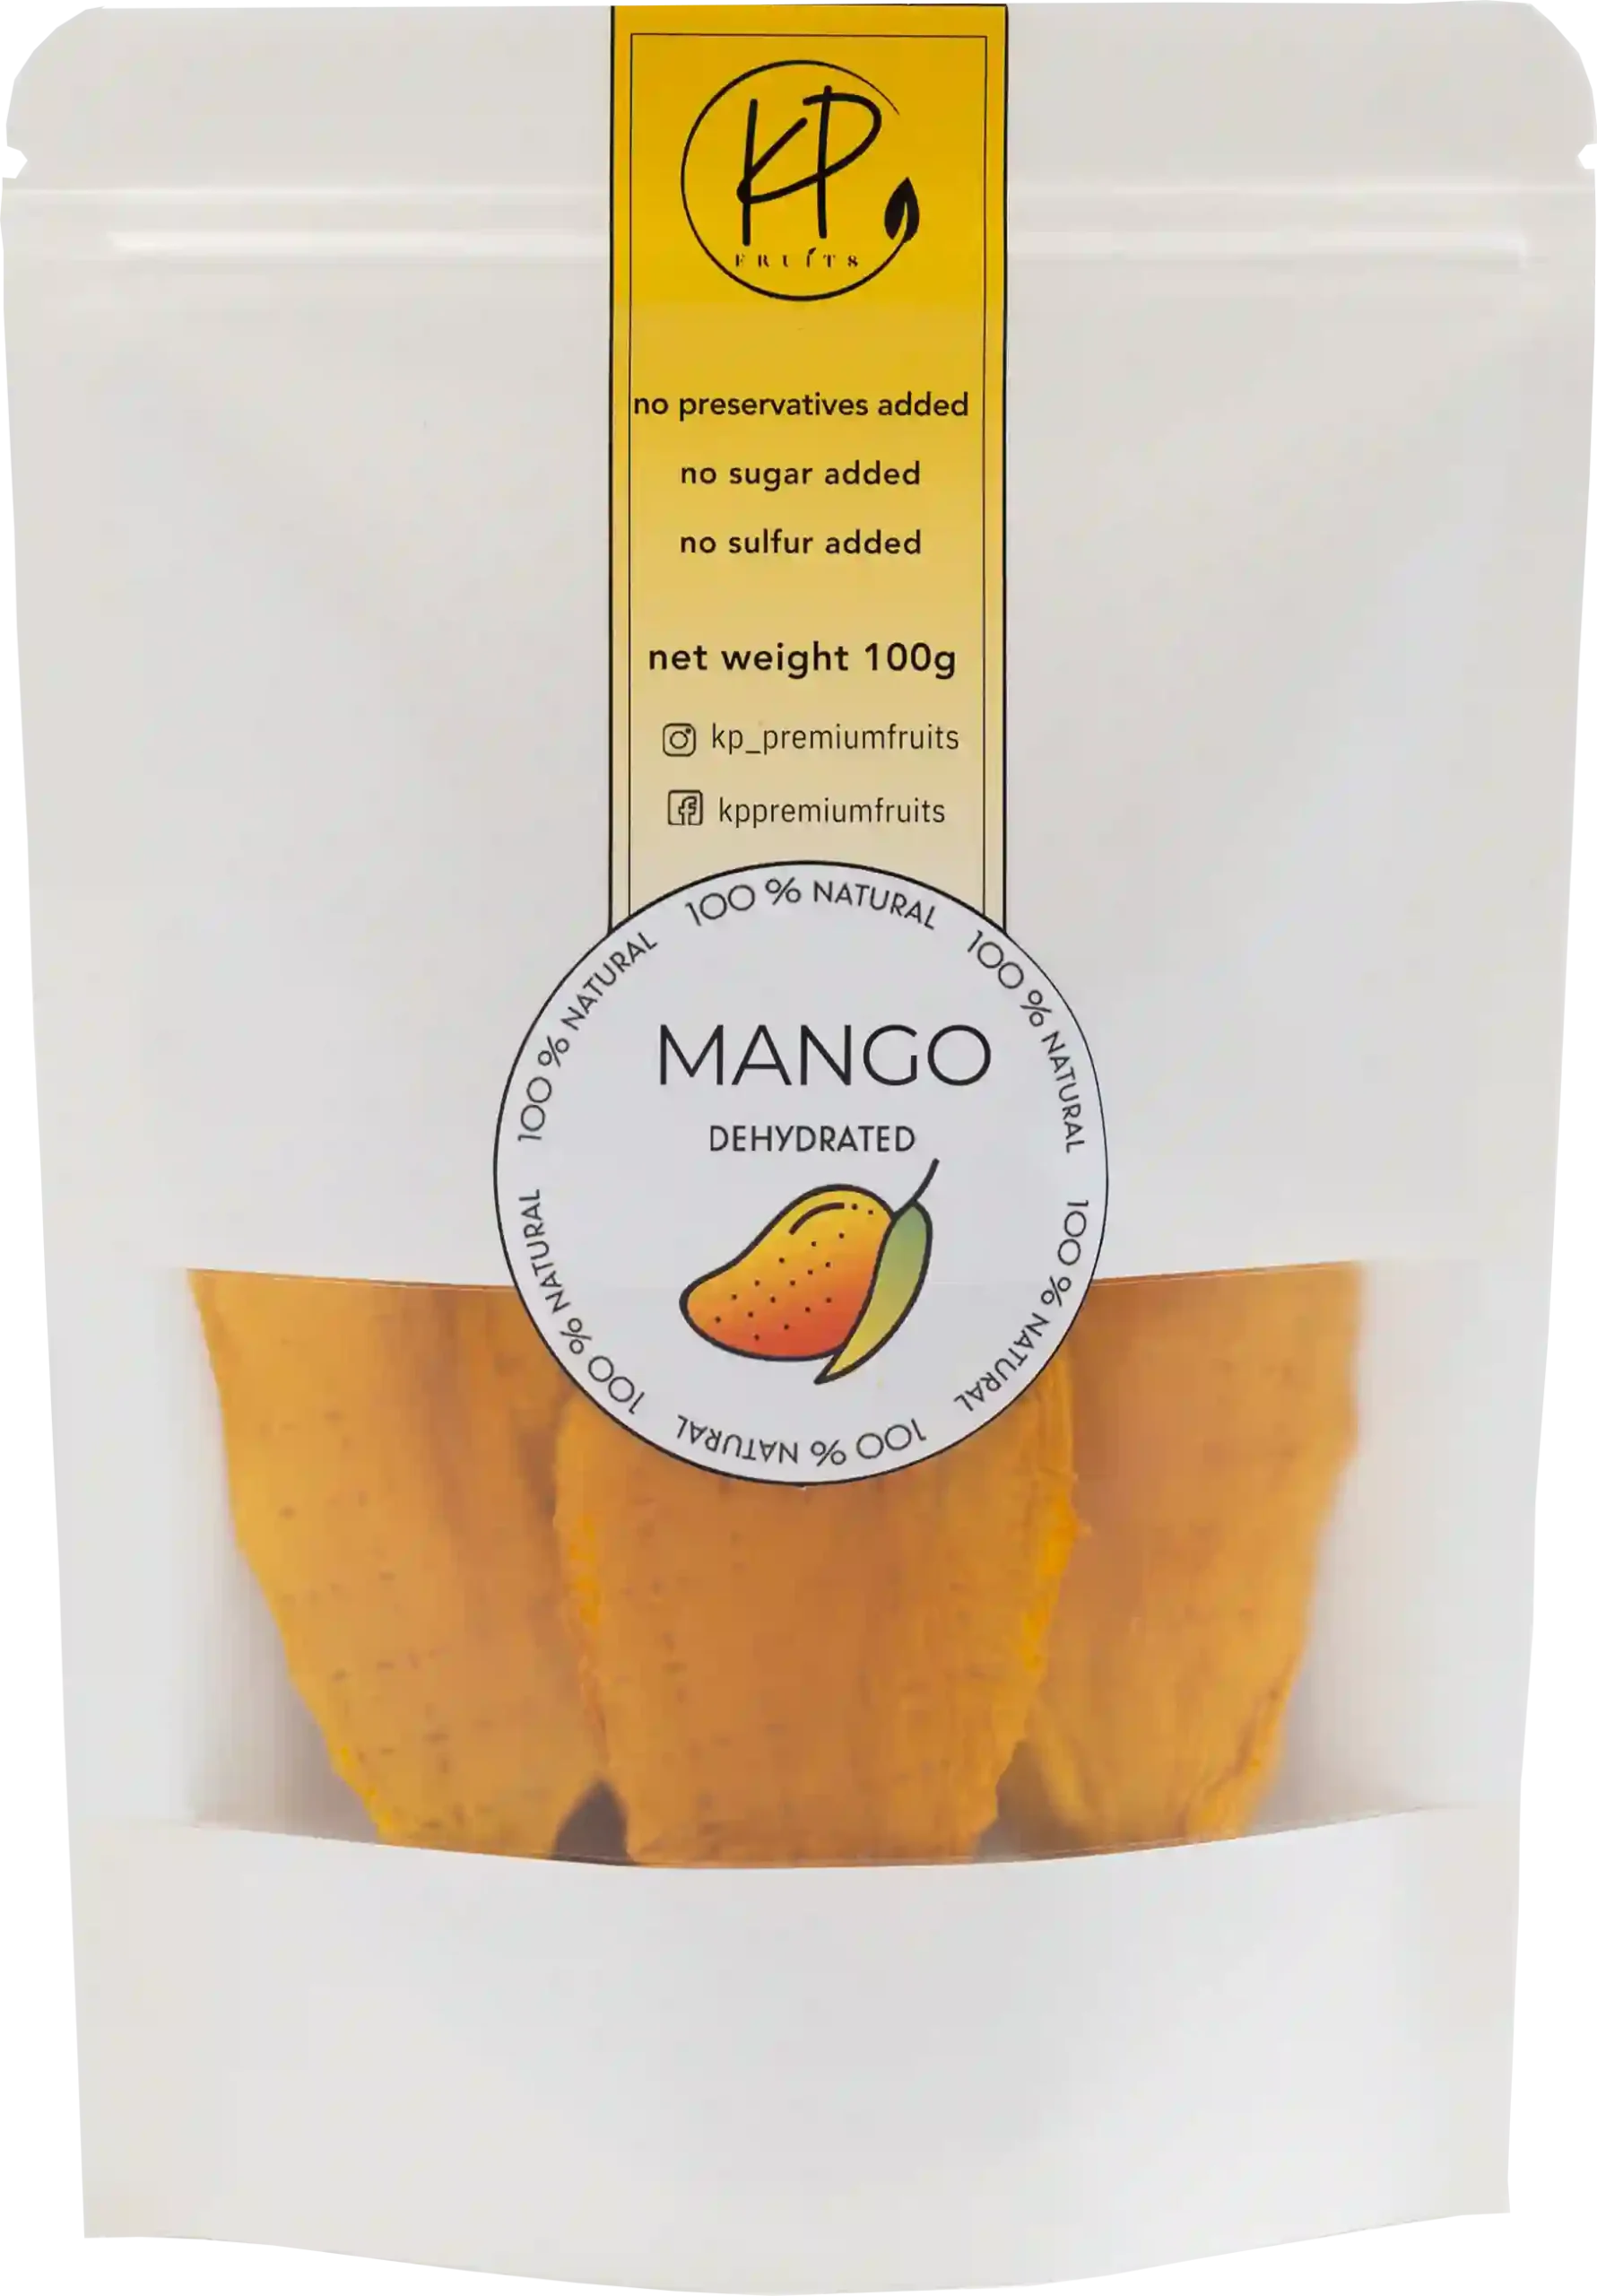 dried mangoes provide a delectable and easy-to-enjoy snack experience, encapsulating the tropical sweetness in each mouthful.